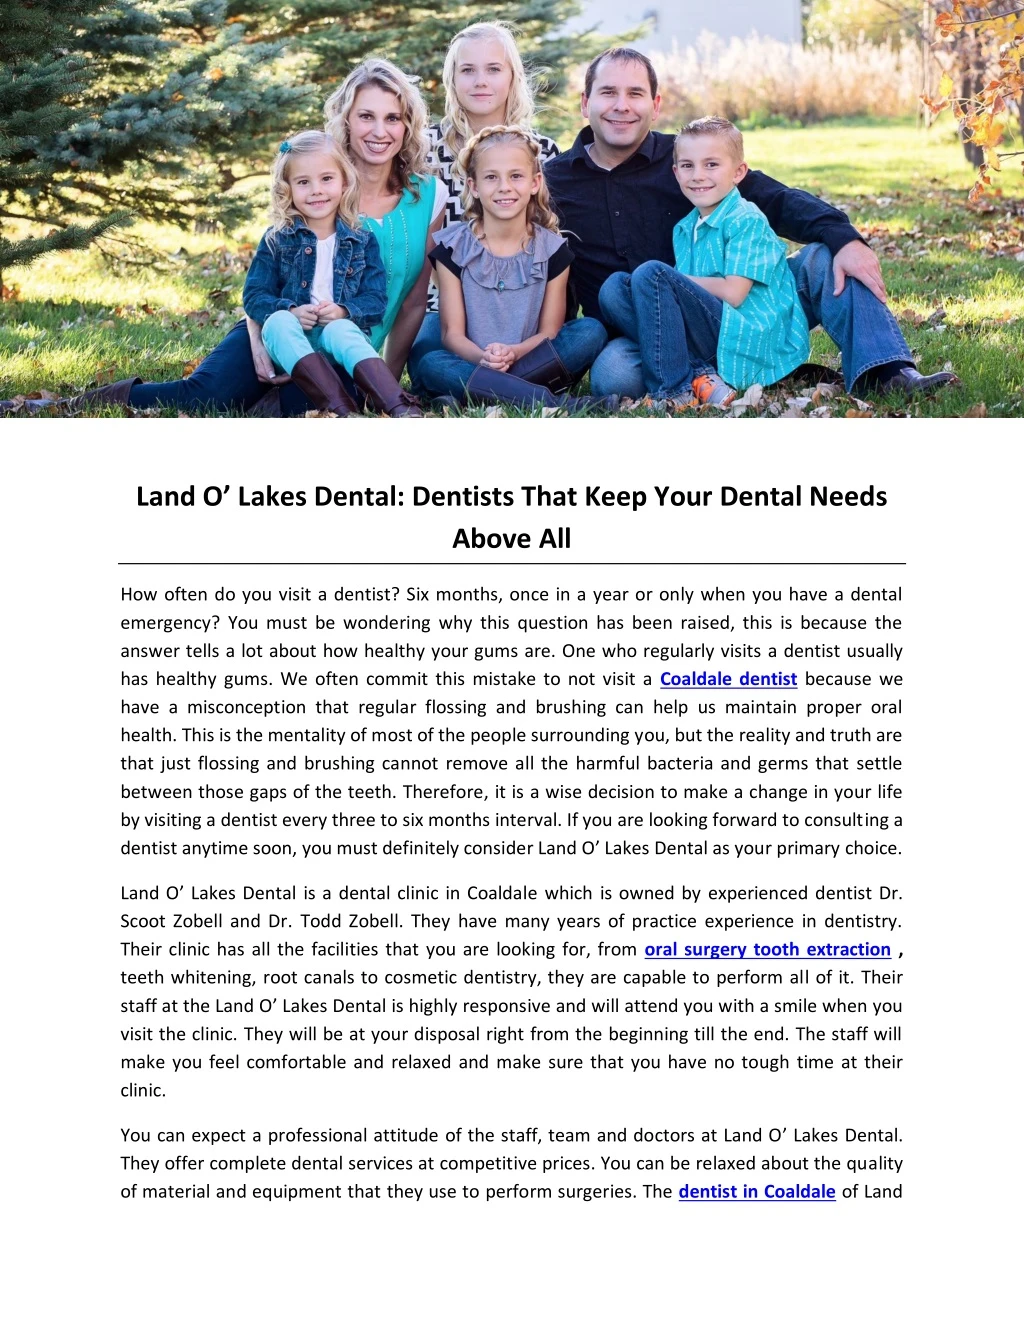 land o lakes dental dentists that keep your